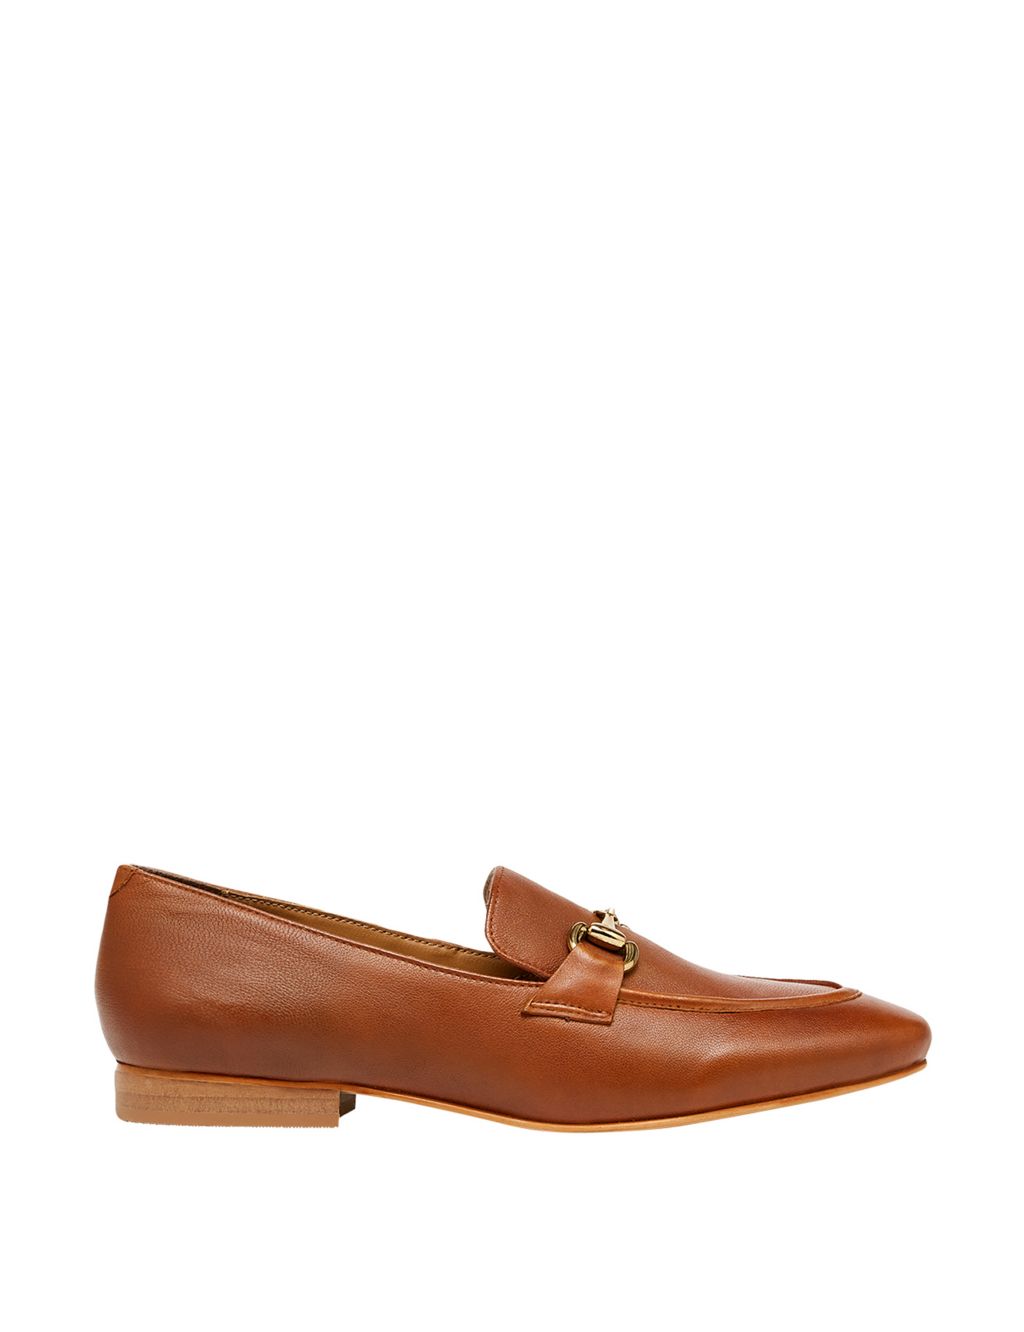 Leather Bar Flat Loafers image 1